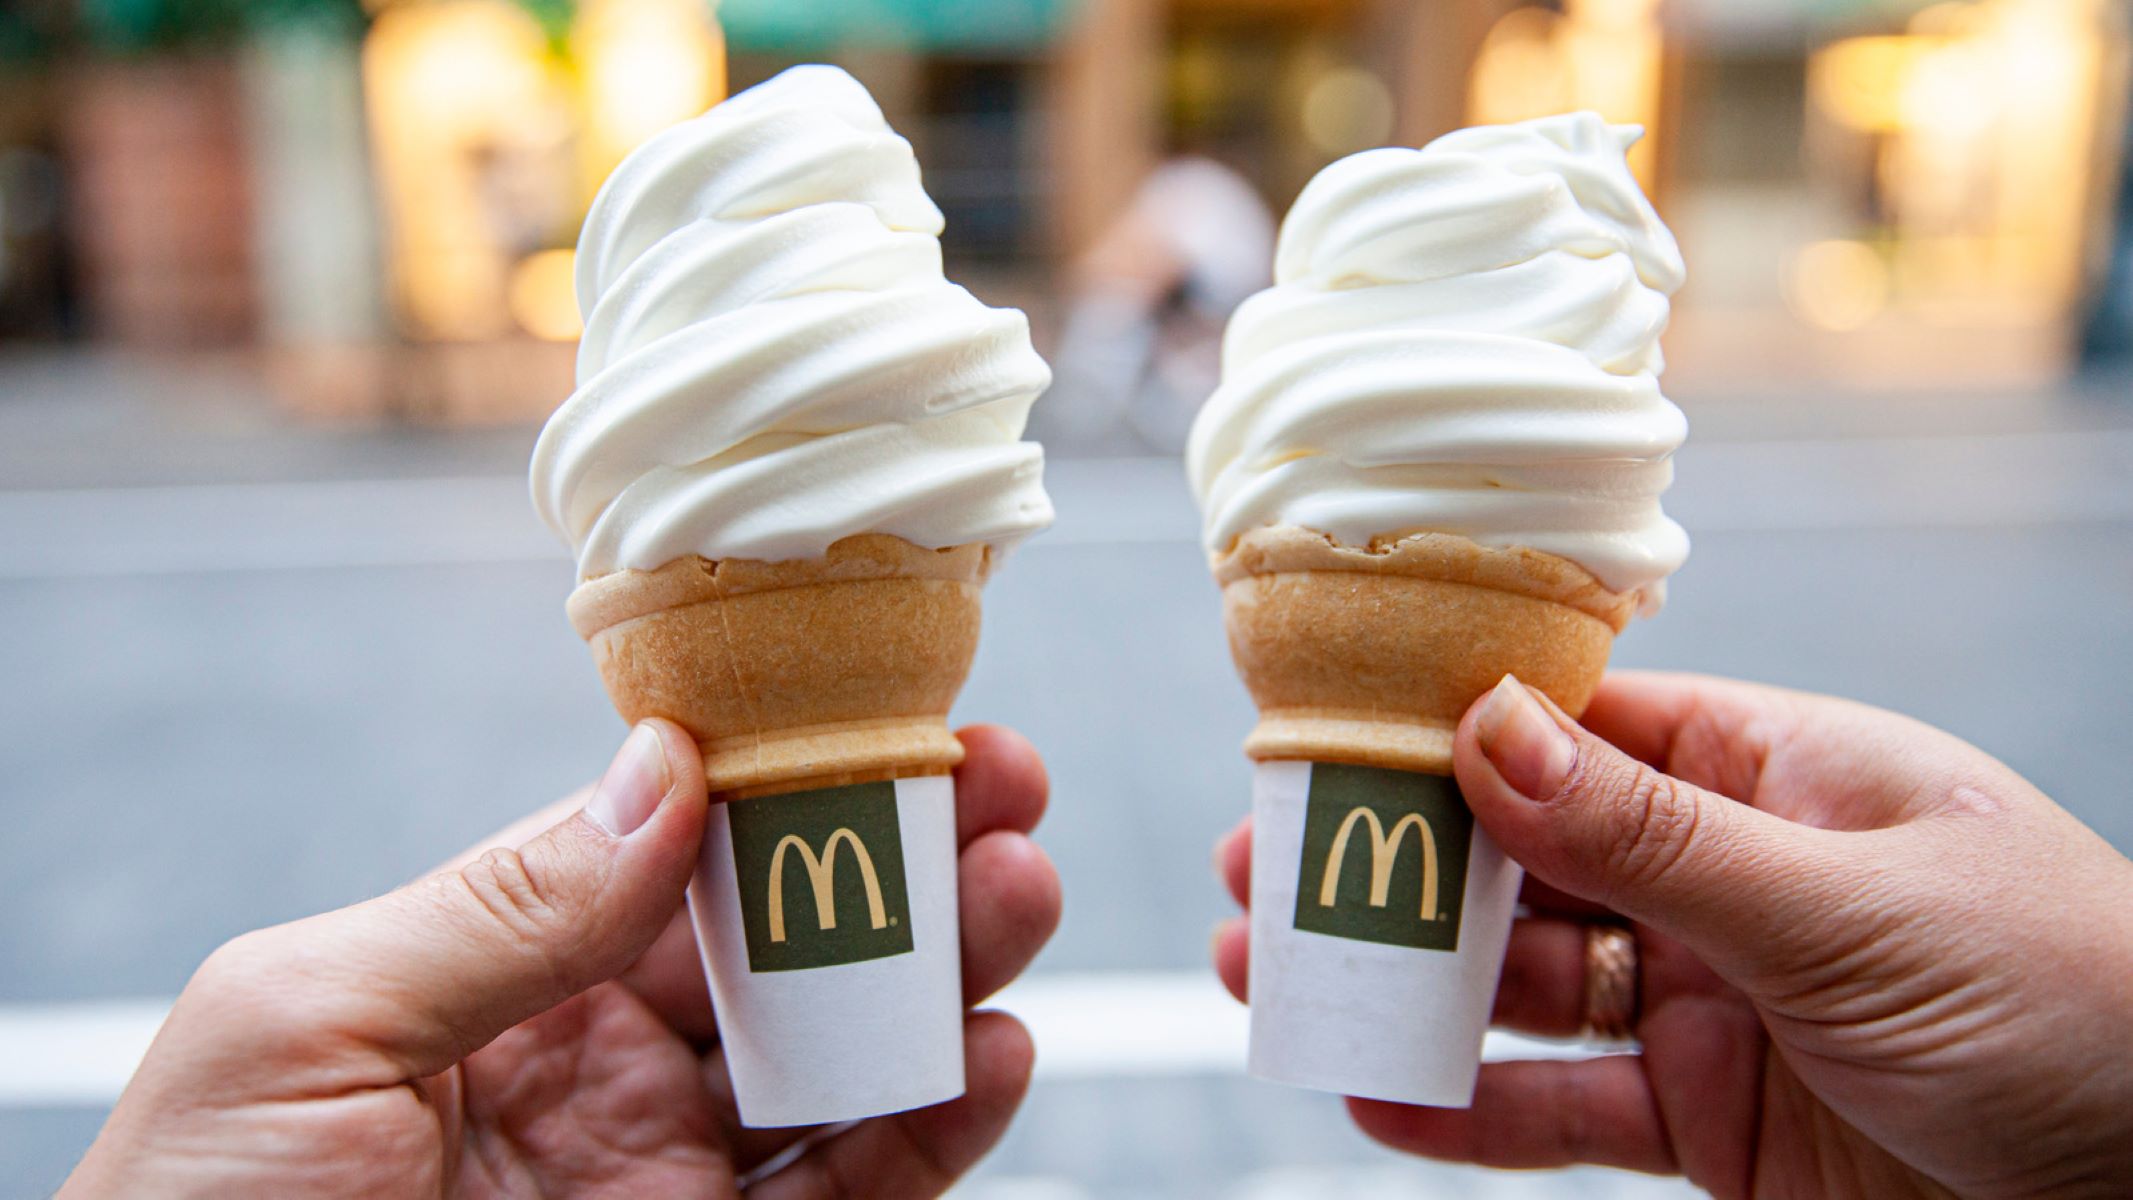 Outrageous! McDonald’s Doubles Price Of Ice Cream Cones Overnight